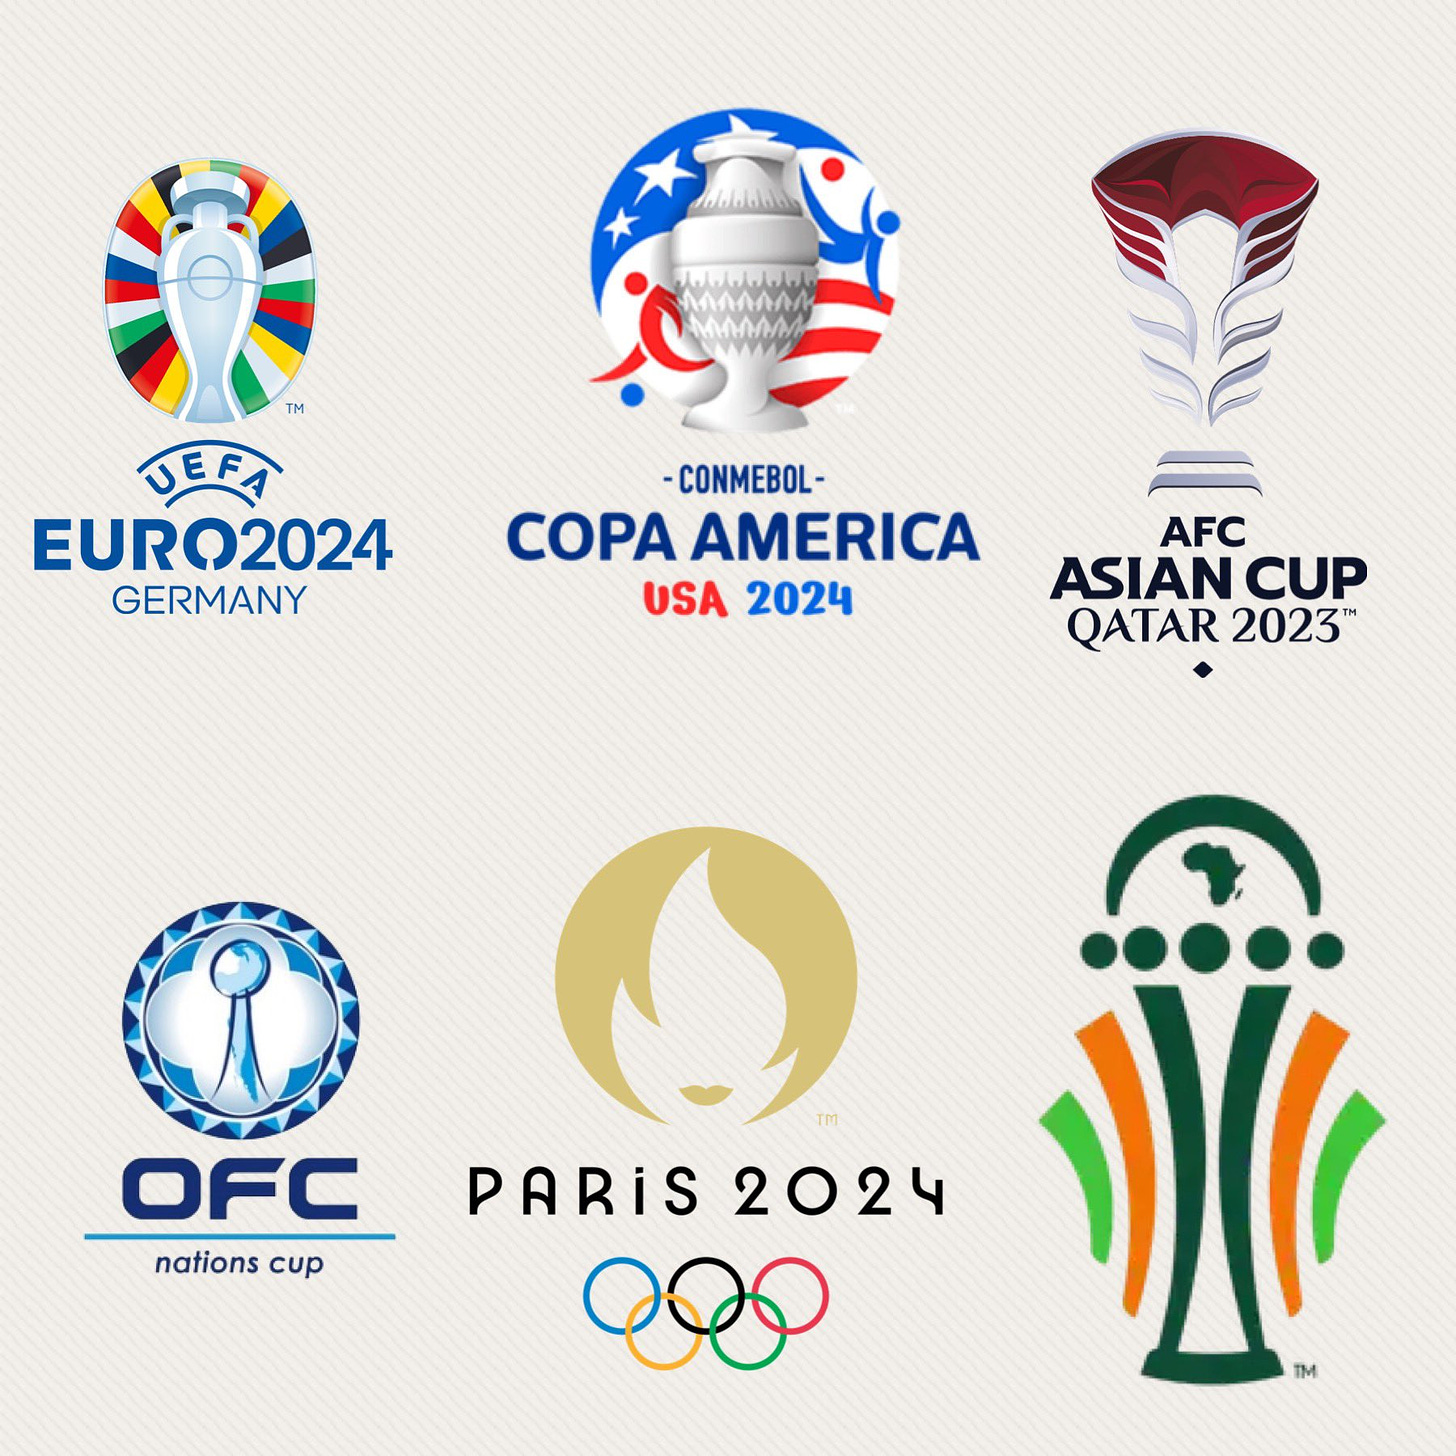 Nico Cantor on X: "Get ready for a WIIIIIILDDDD 2024 🇨🇮 AFCON 🇶🇦 AFC  Asian Cup 🇺🇸 Copa América 🇩🇪 Euro 🇫🇷 Summer Olympics 🇻🇺 OFC Nations  Cup https://t.co/sxIIpfqE0t" / X